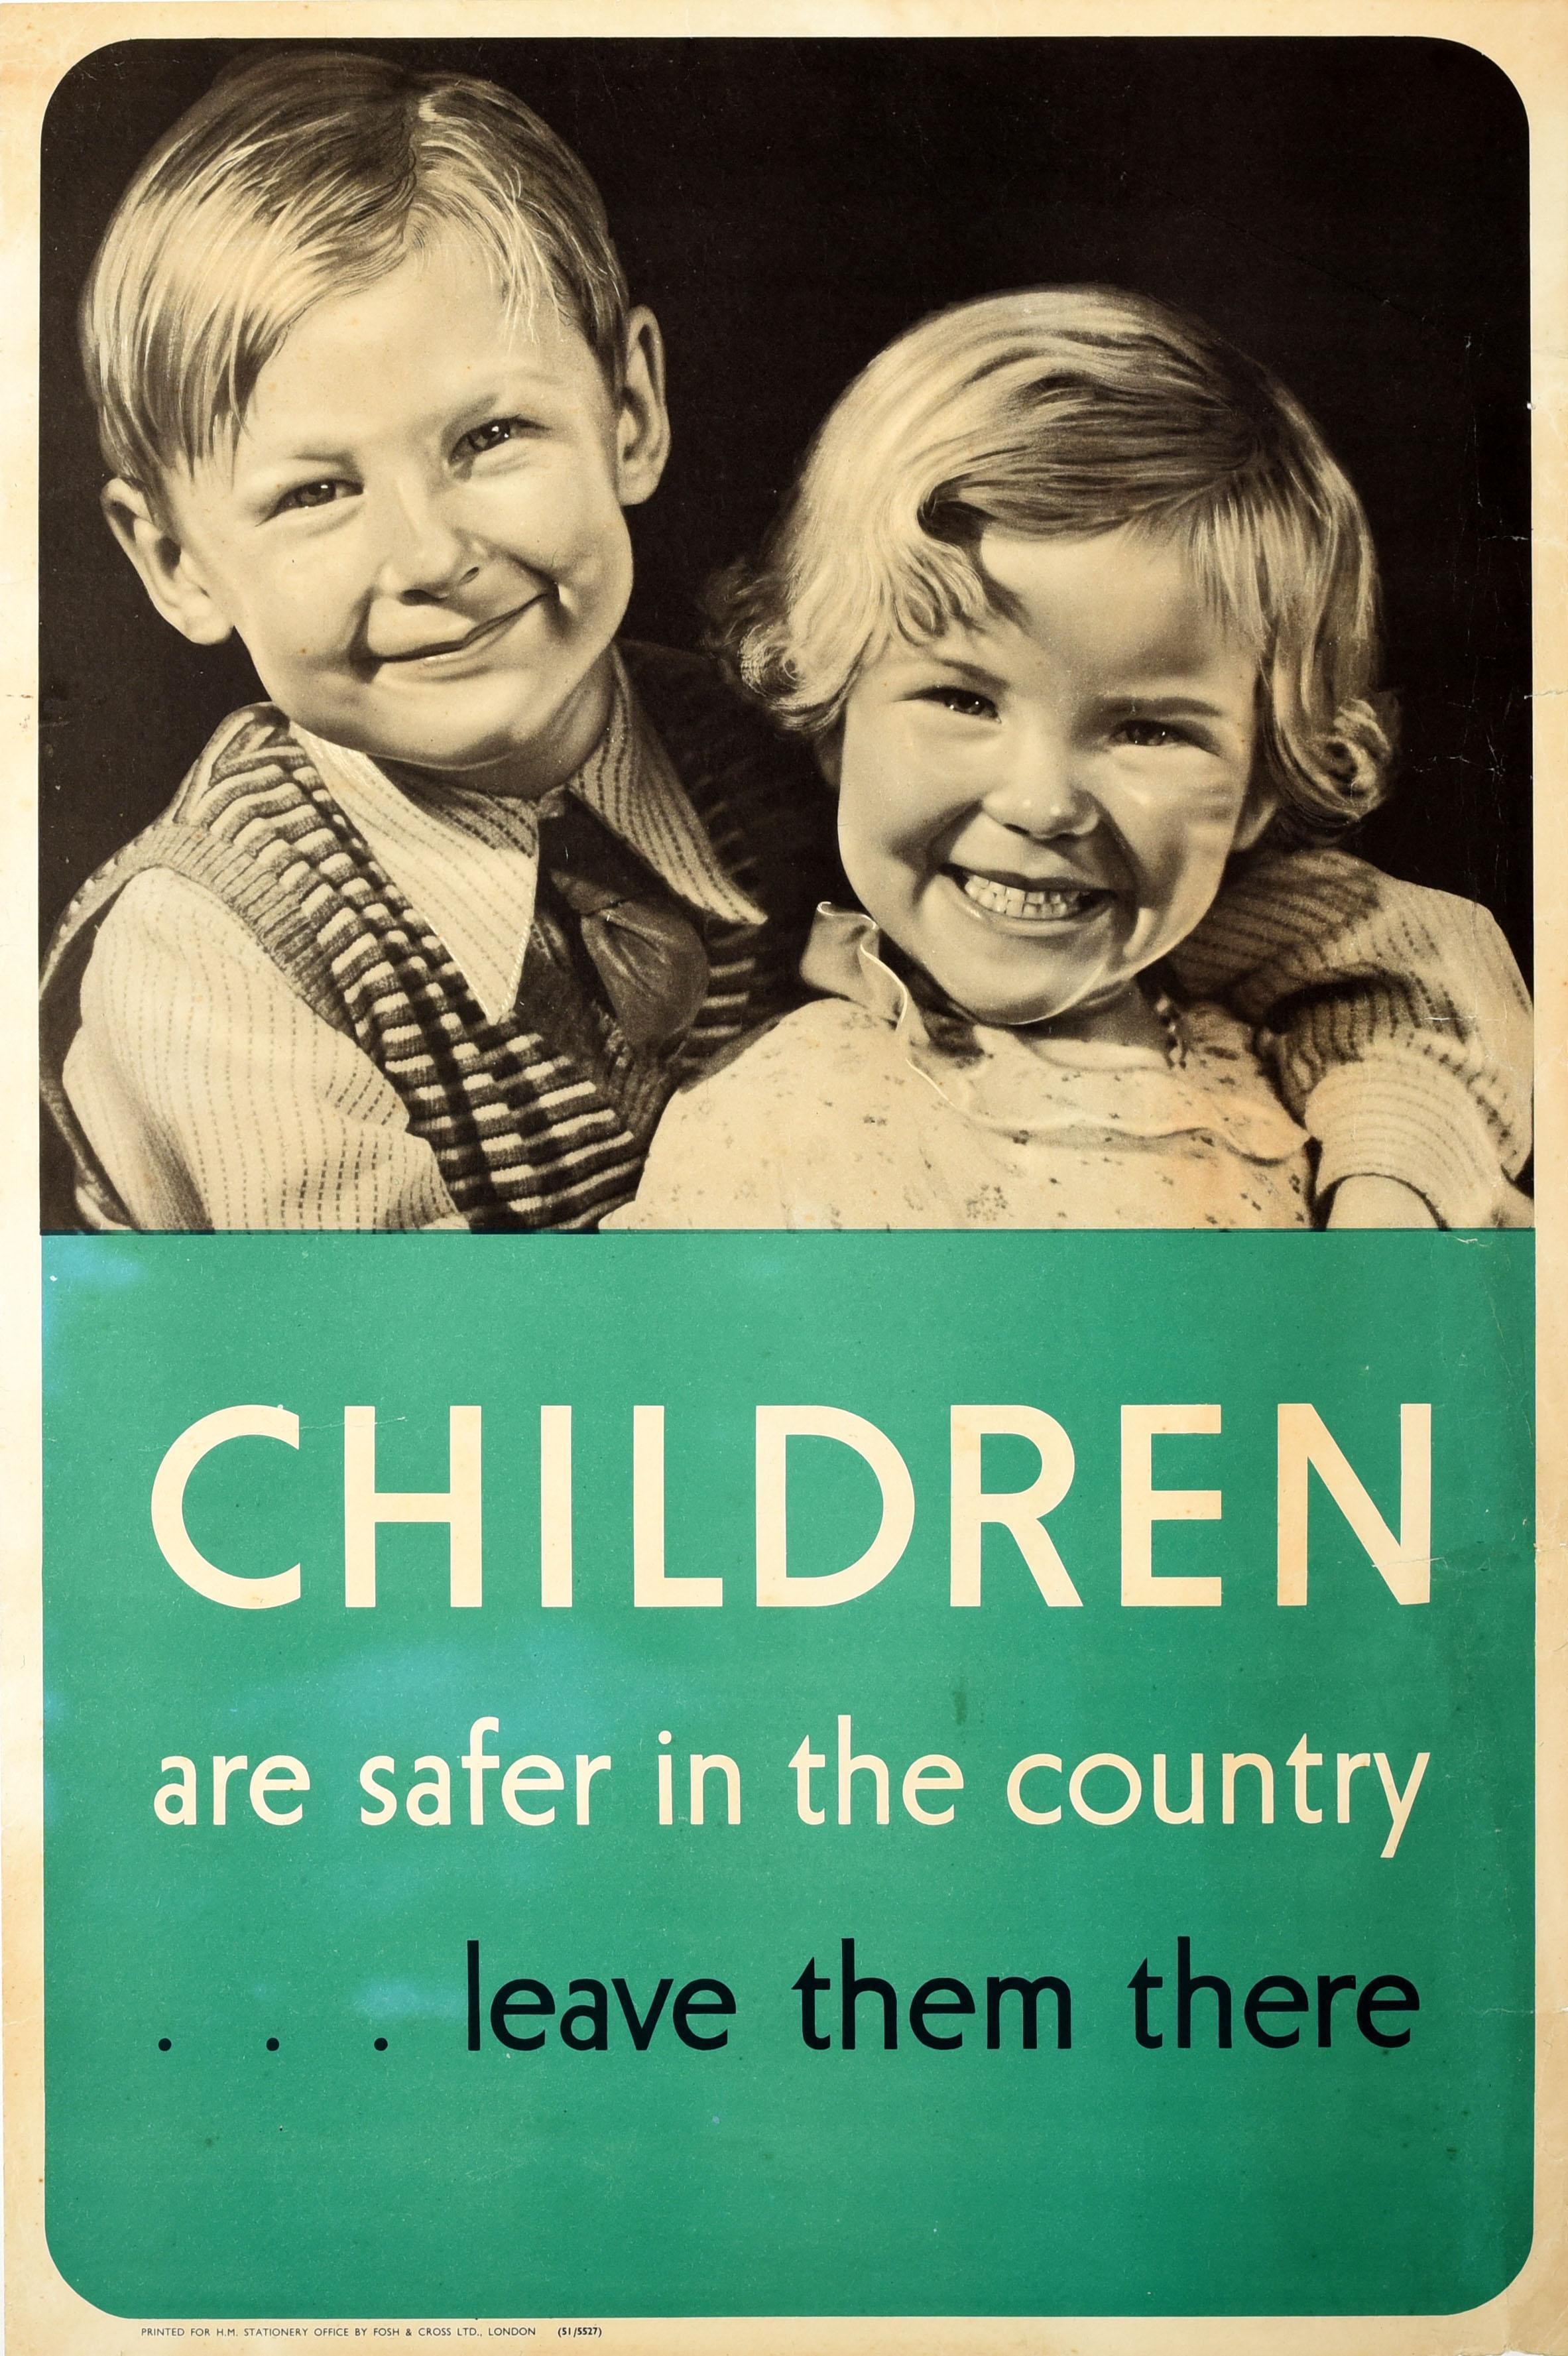 Unknown Print - Original Vintage WWII Poster Children Are Safer In The Country War Evacuation